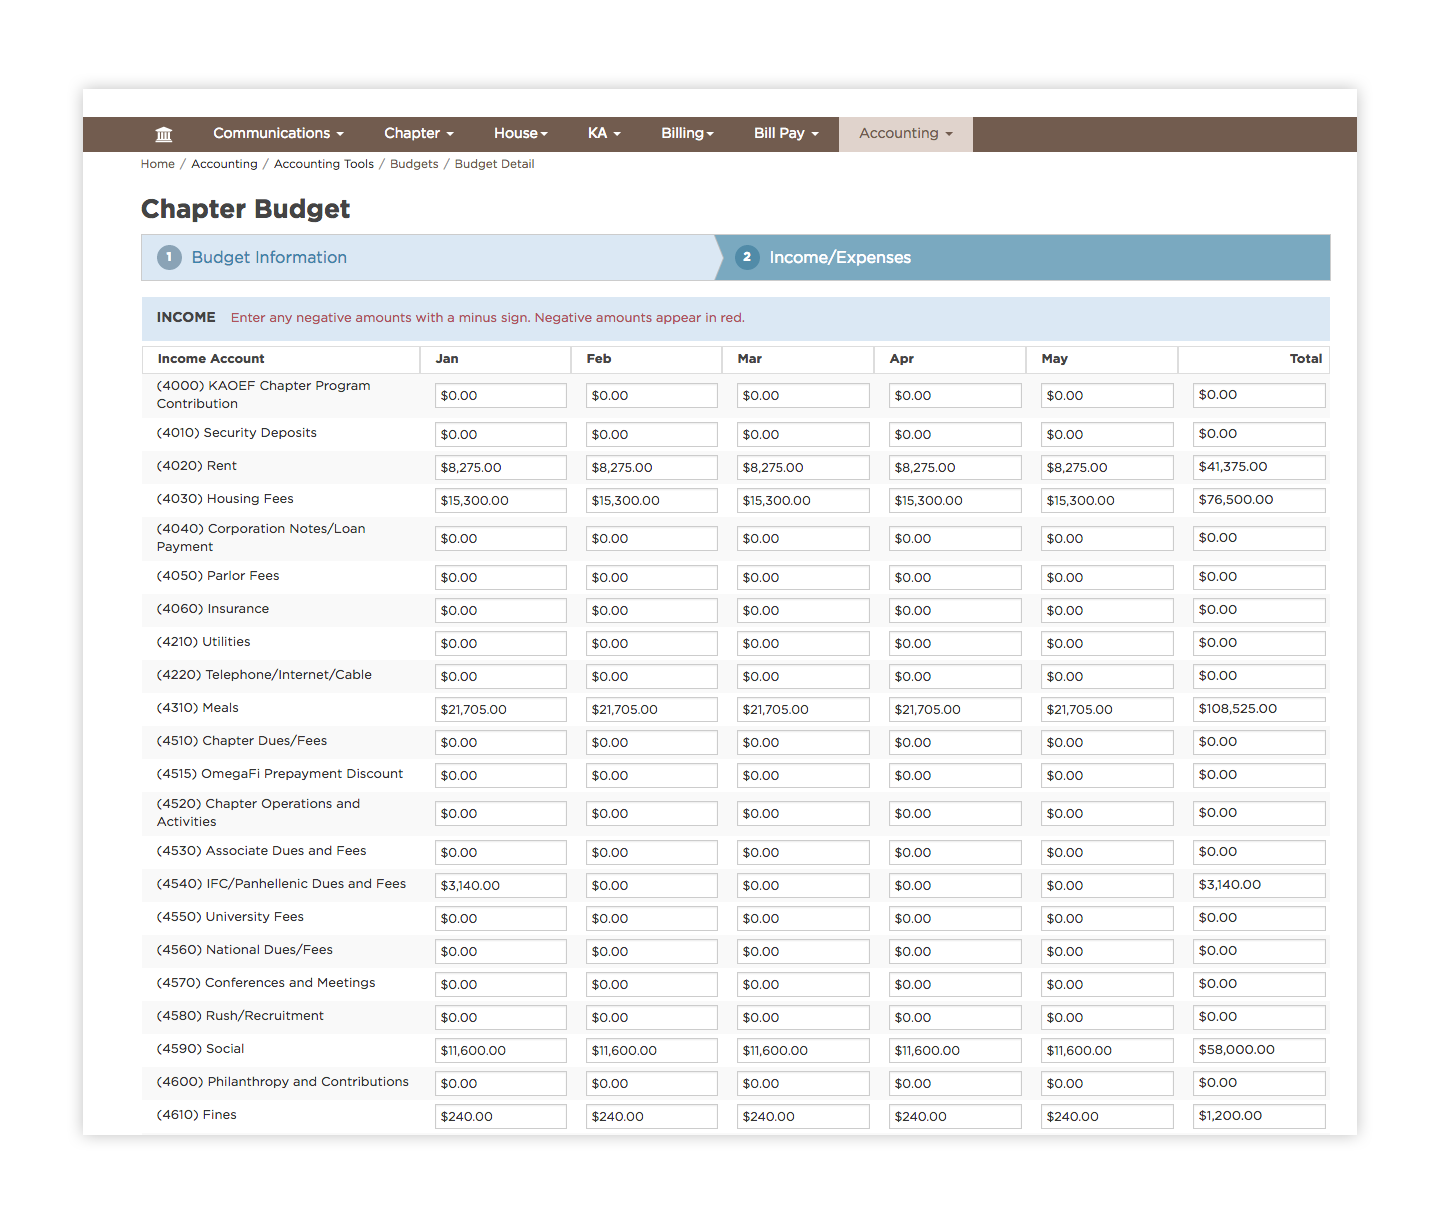 Sororities and fraternities can more easily manage their finances with budget and tracking solutions from OmegaFi.